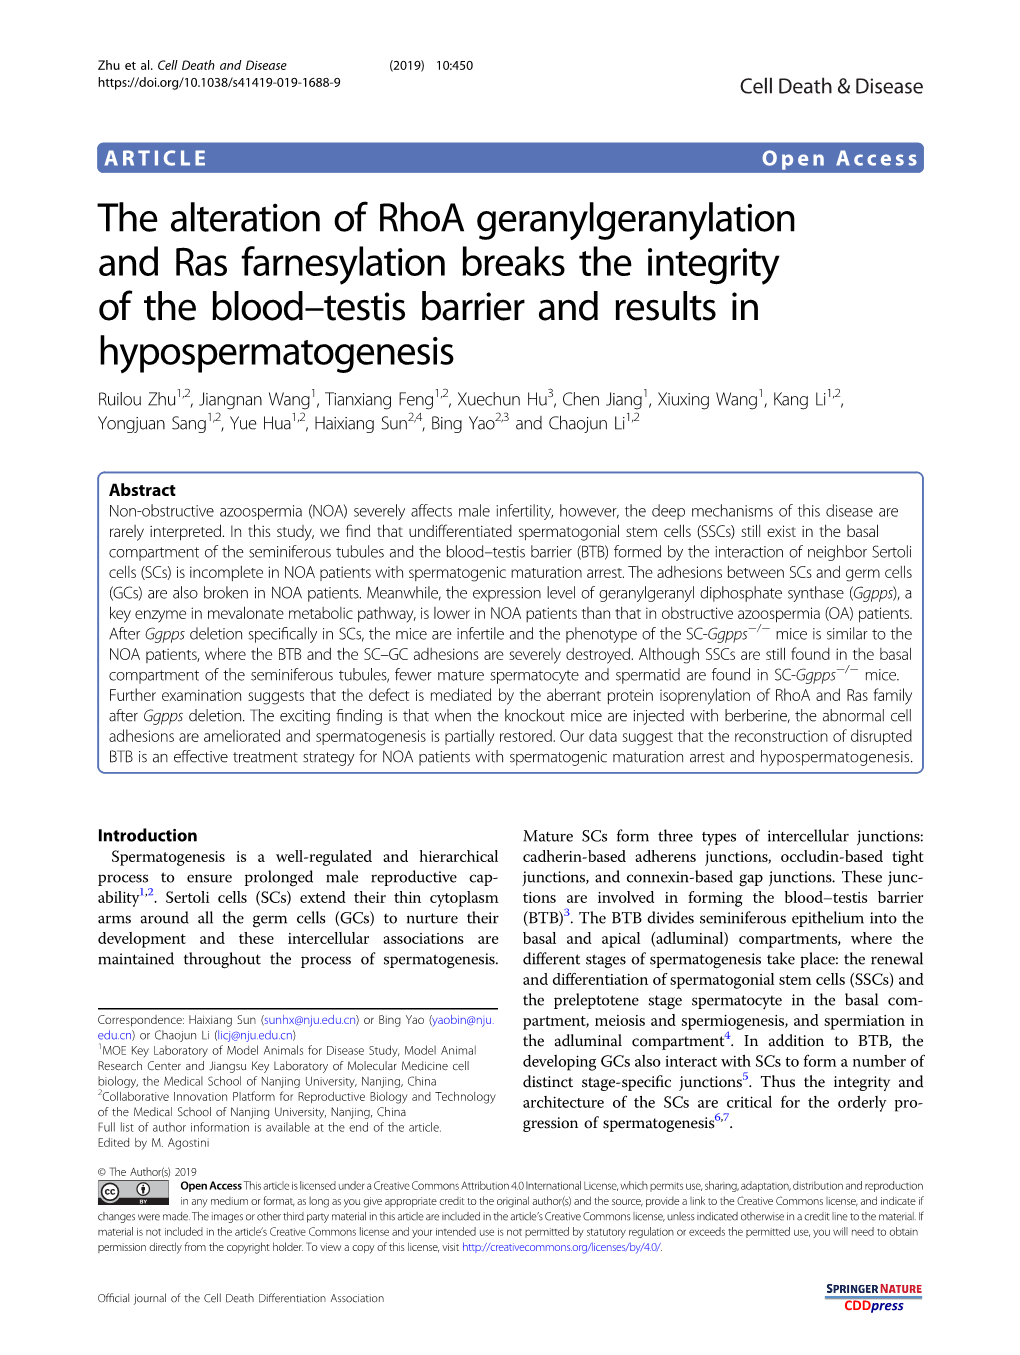 The Alteration of Rhoa Geranylgeranylation and Ras Farnesylation Breaks the Integrity of the Blood–Testis Barrier and Results